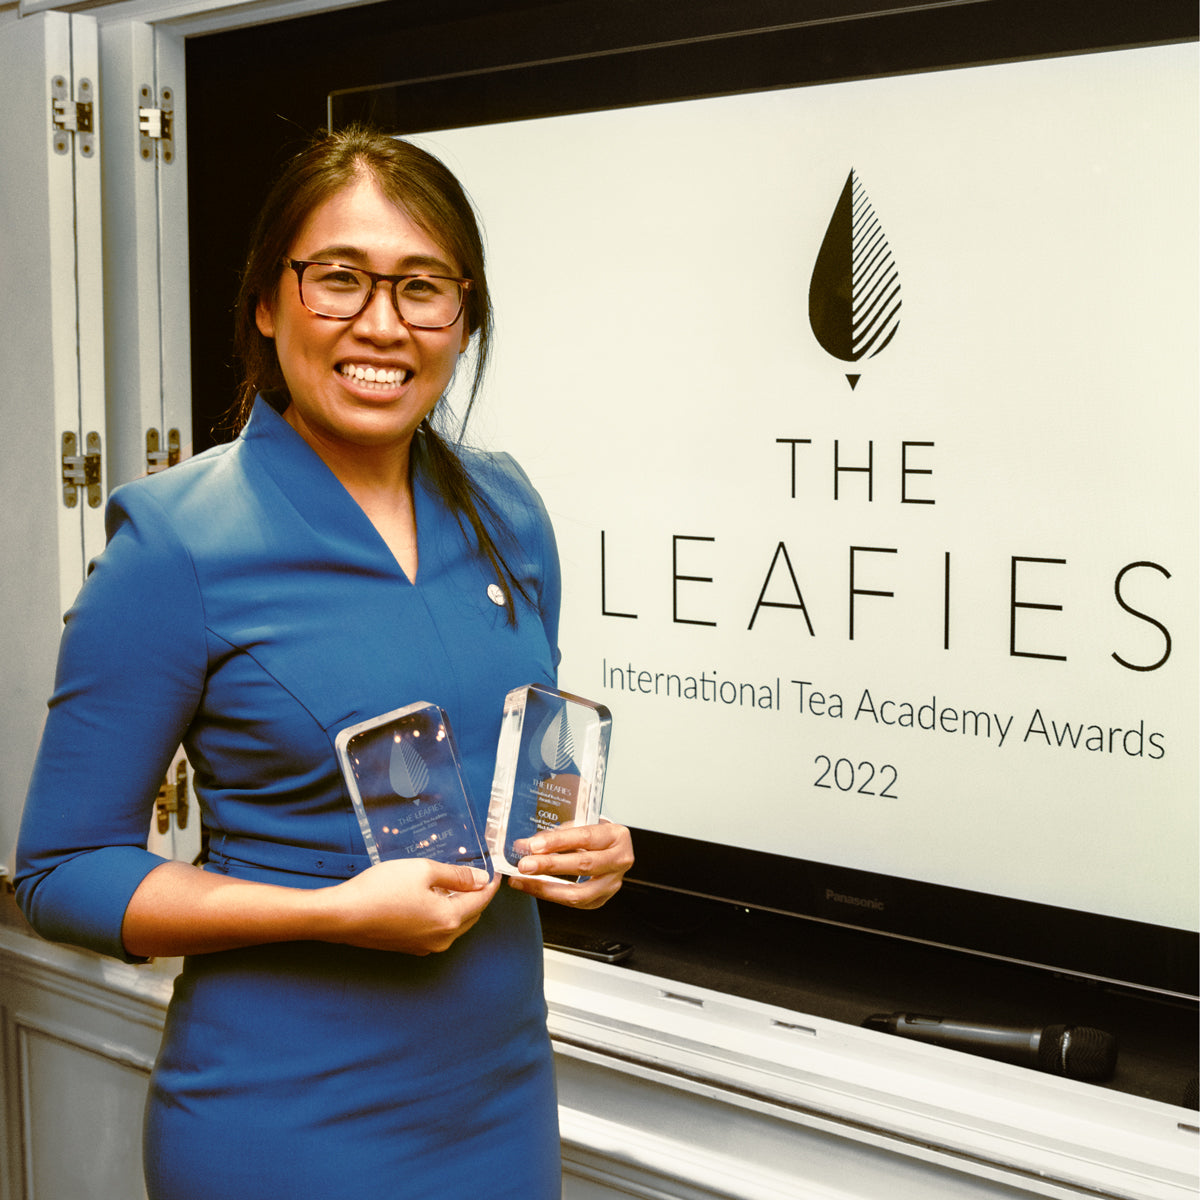 Phyu Thwe at the Leafies awards ceremony